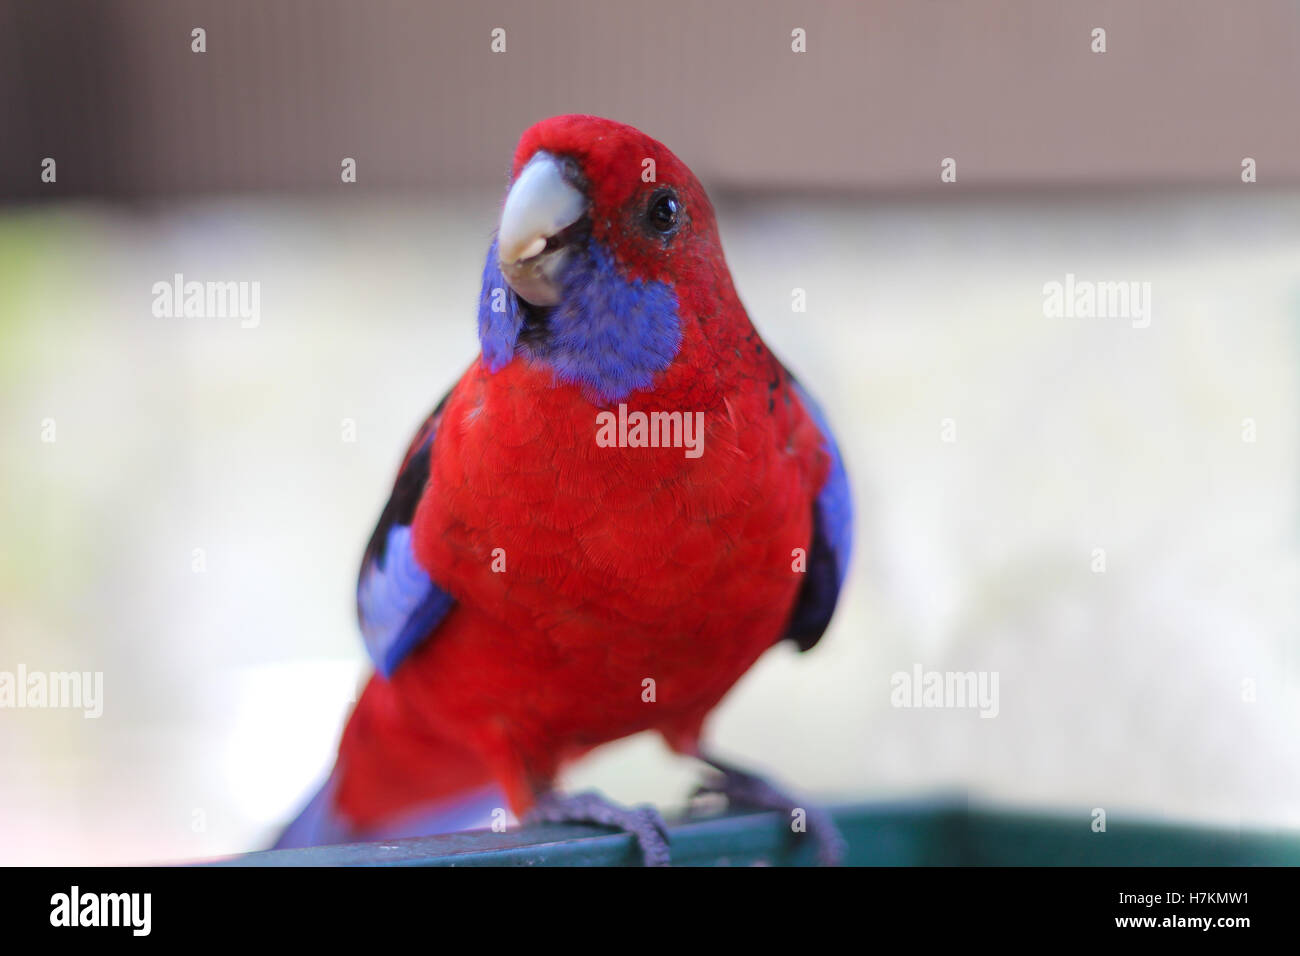 Crimson Rosella, a small red and blue parrot native to eastern and south eastern Australia. Stock Photo